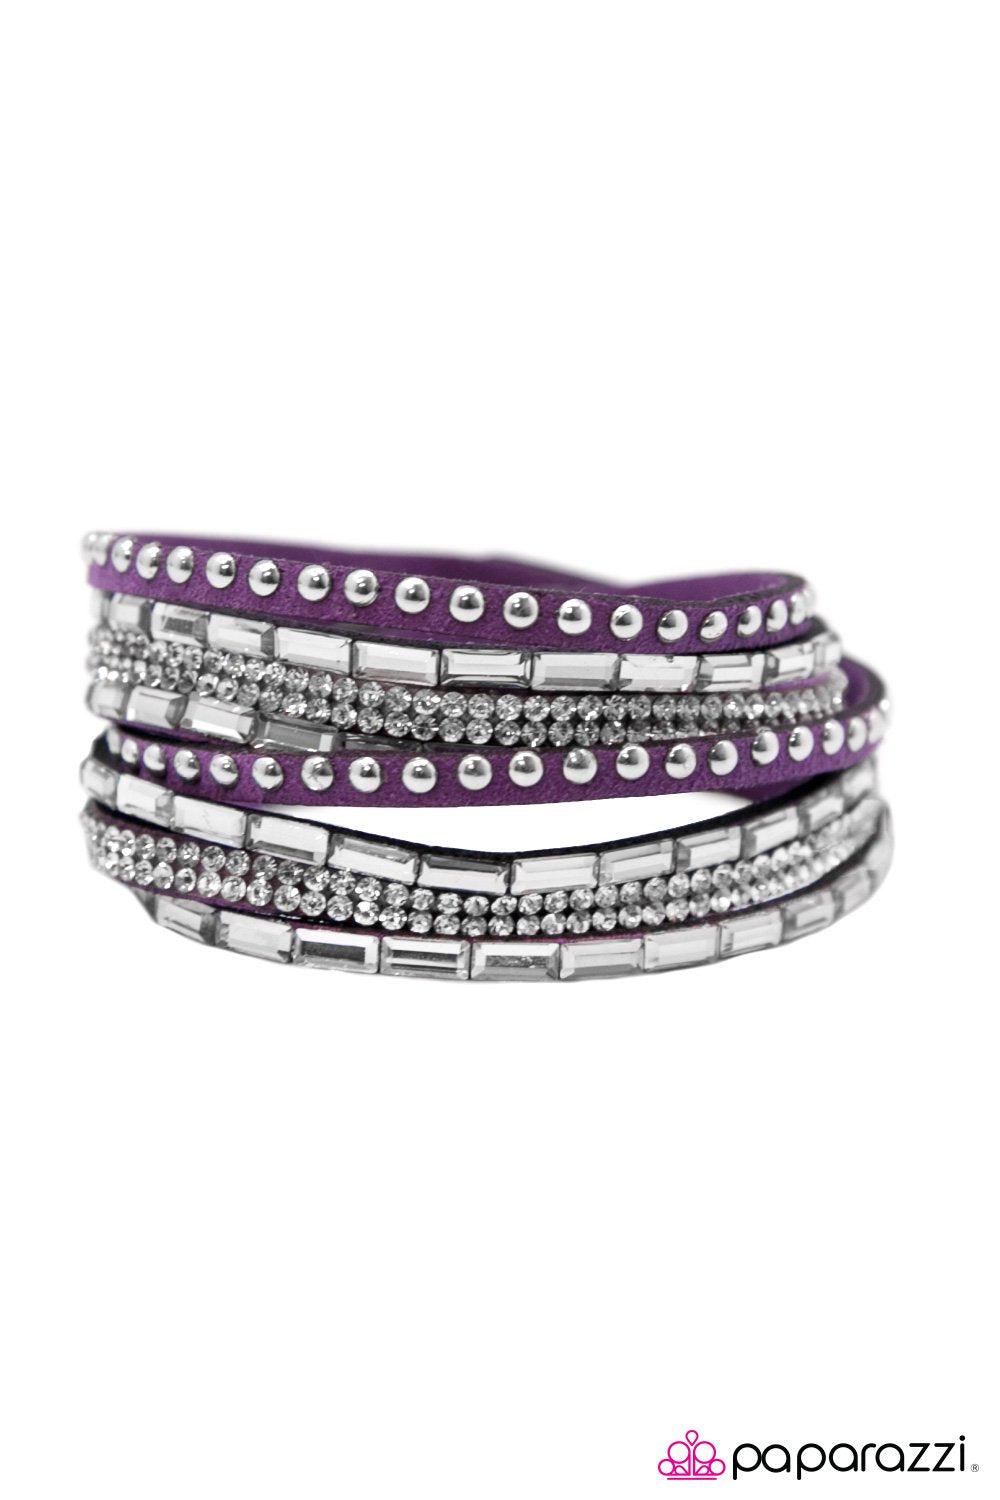 Varsity Team Purple and Silver Double-wrap Snap Bracelet - Paparazzi Accessories-CarasShop.com - $5 Jewelry by Cara Jewels